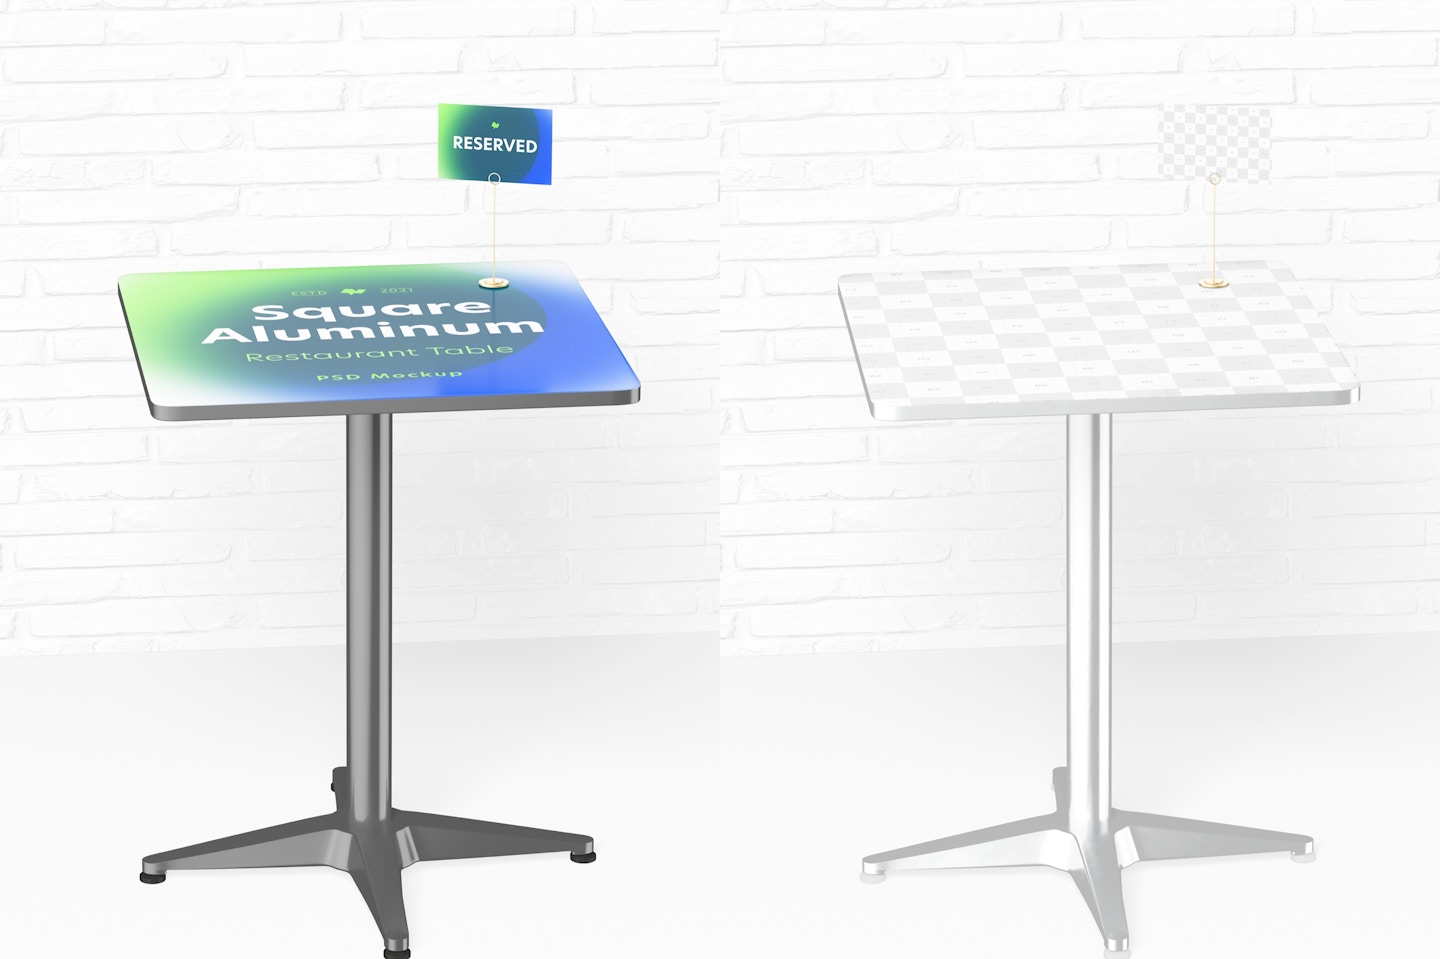 Square Aluminum Restaurant Table Mockup, Front View